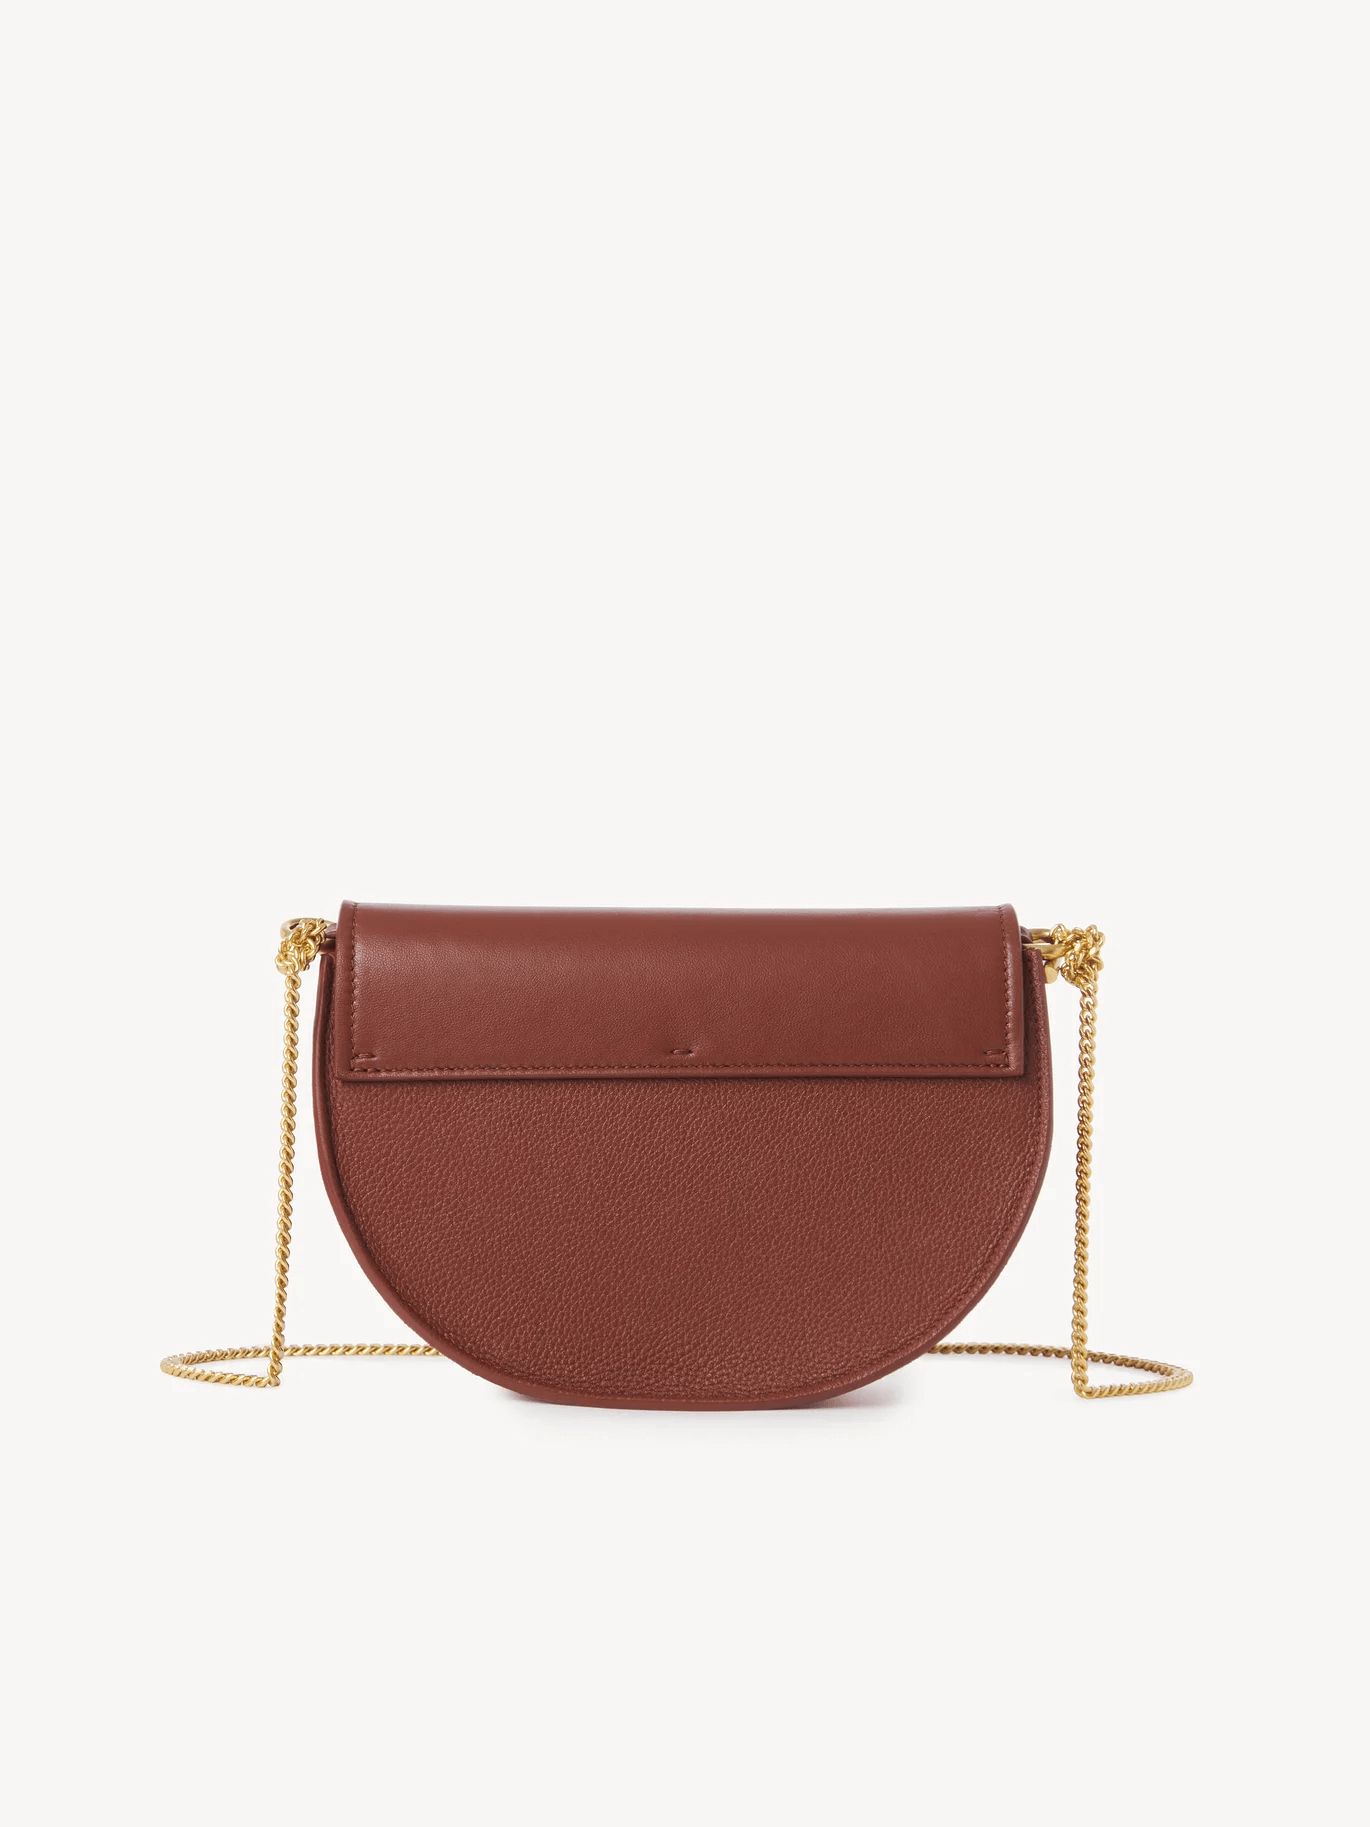 Chloé Marcie Chain Flap Bag in Sepia Brown available at The New Trend.